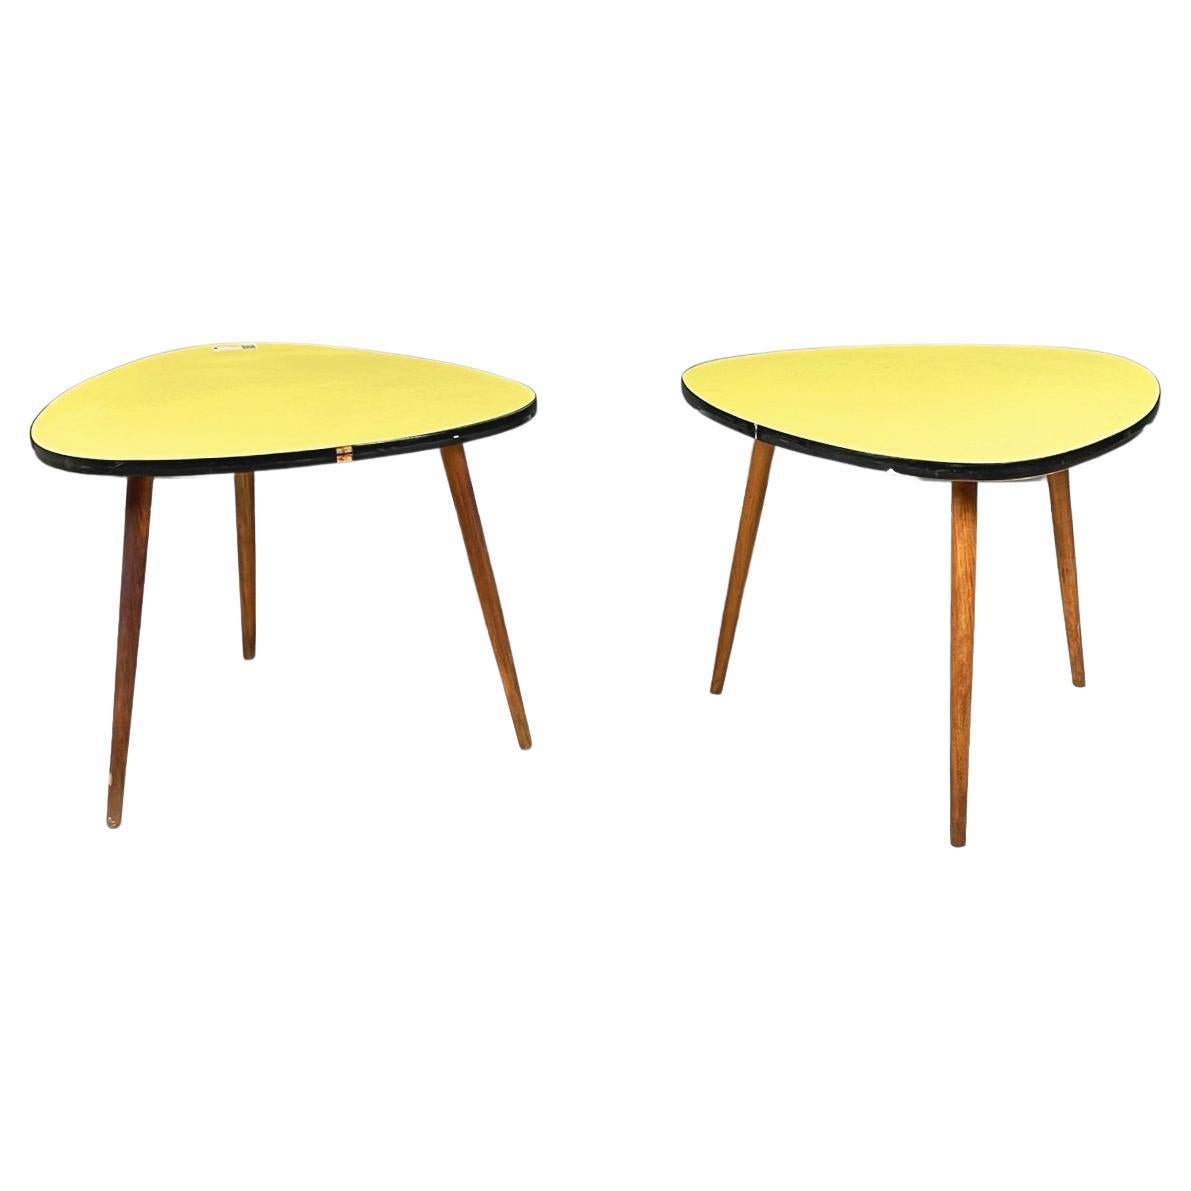 Northern European Midcentury Wood Yellow and Black Formica Coffee Tables, 1960s For Sale